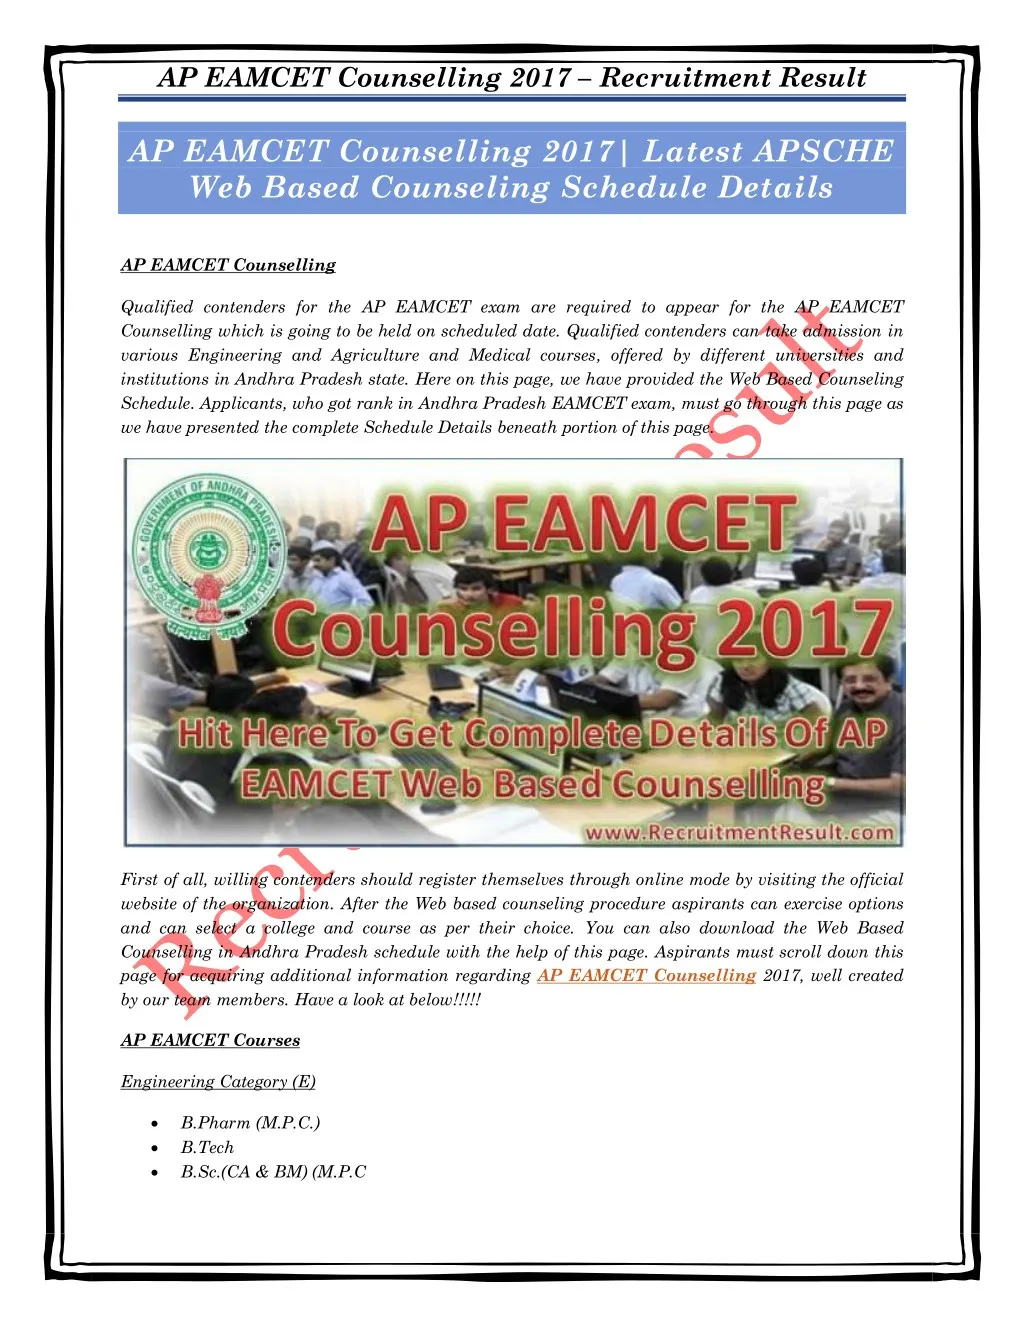 ap eamcet counselling 2017 recruitment result